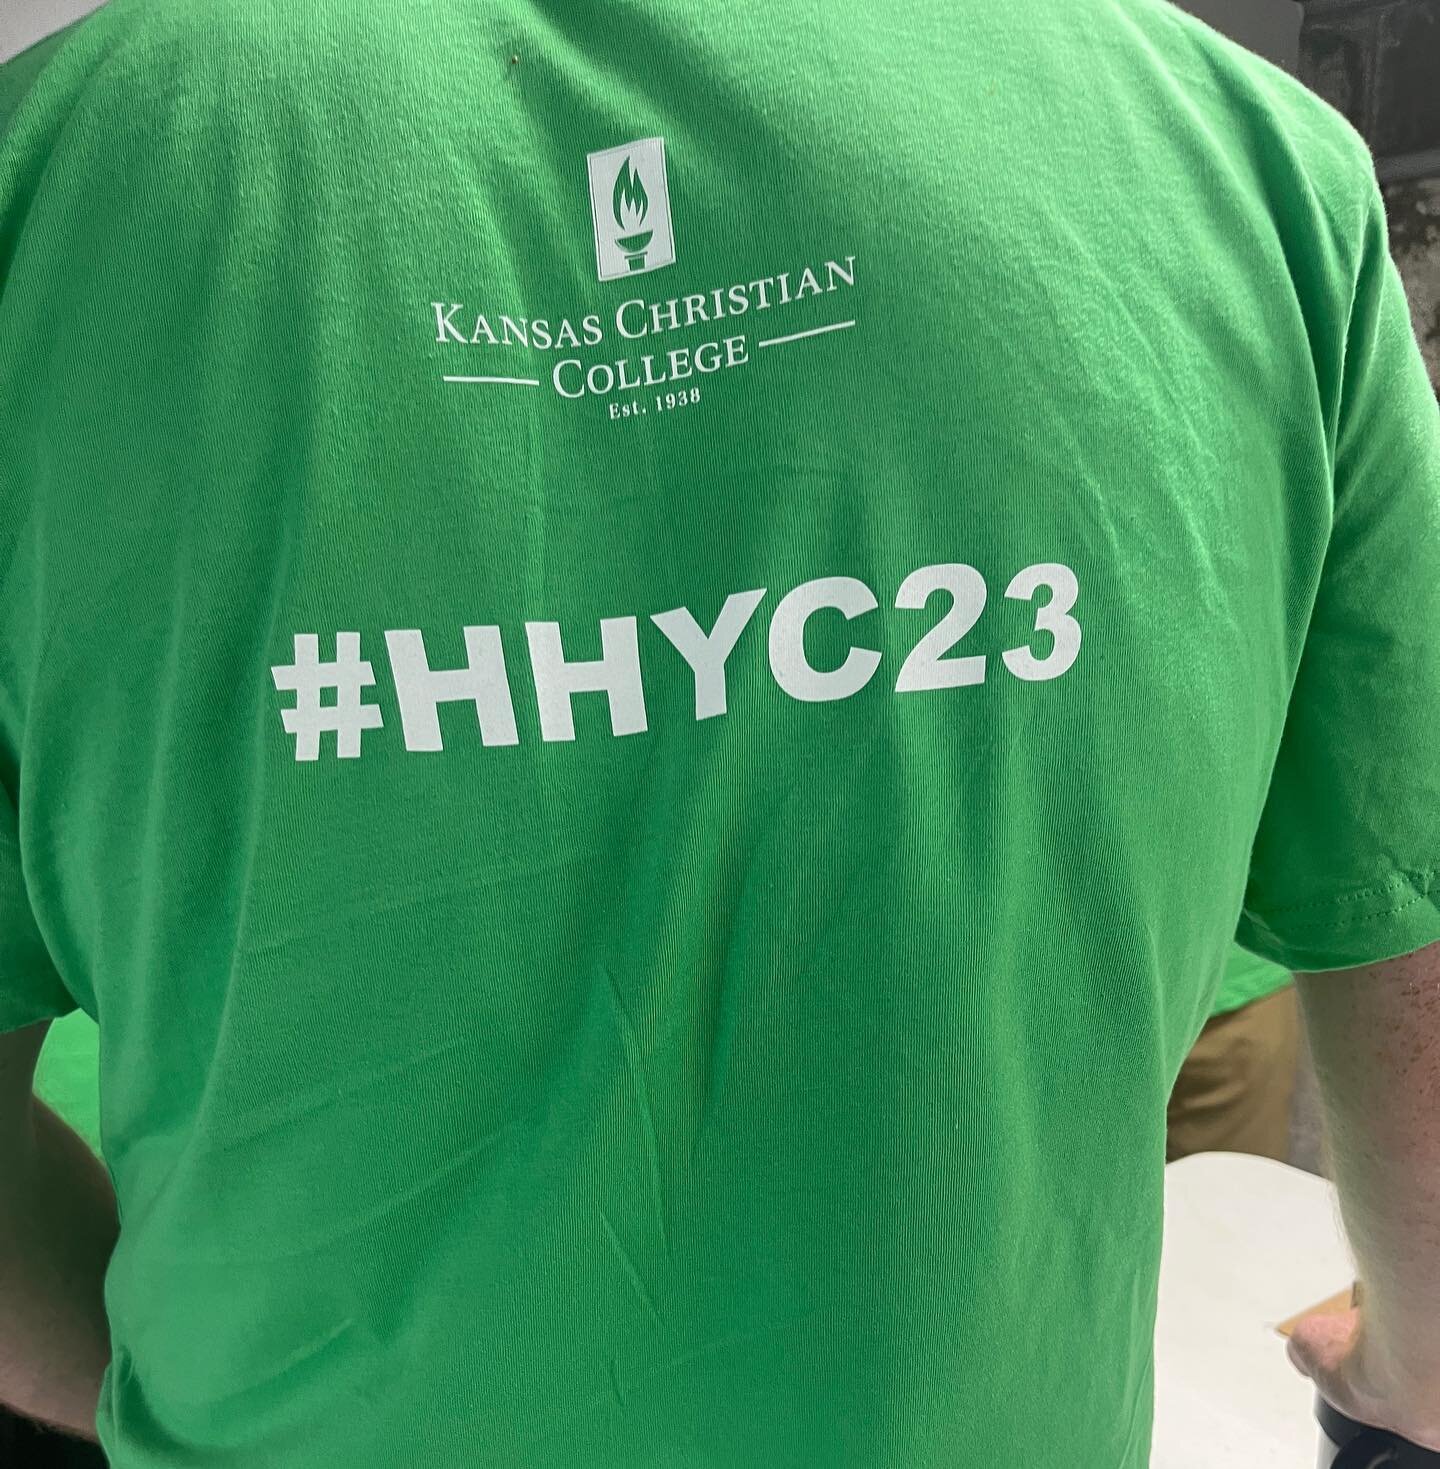 Pray for all our kids and adults who are attending and volunteering at Harmony Hill Youth Camp!  We always find this week to be life changing! #hhyc23